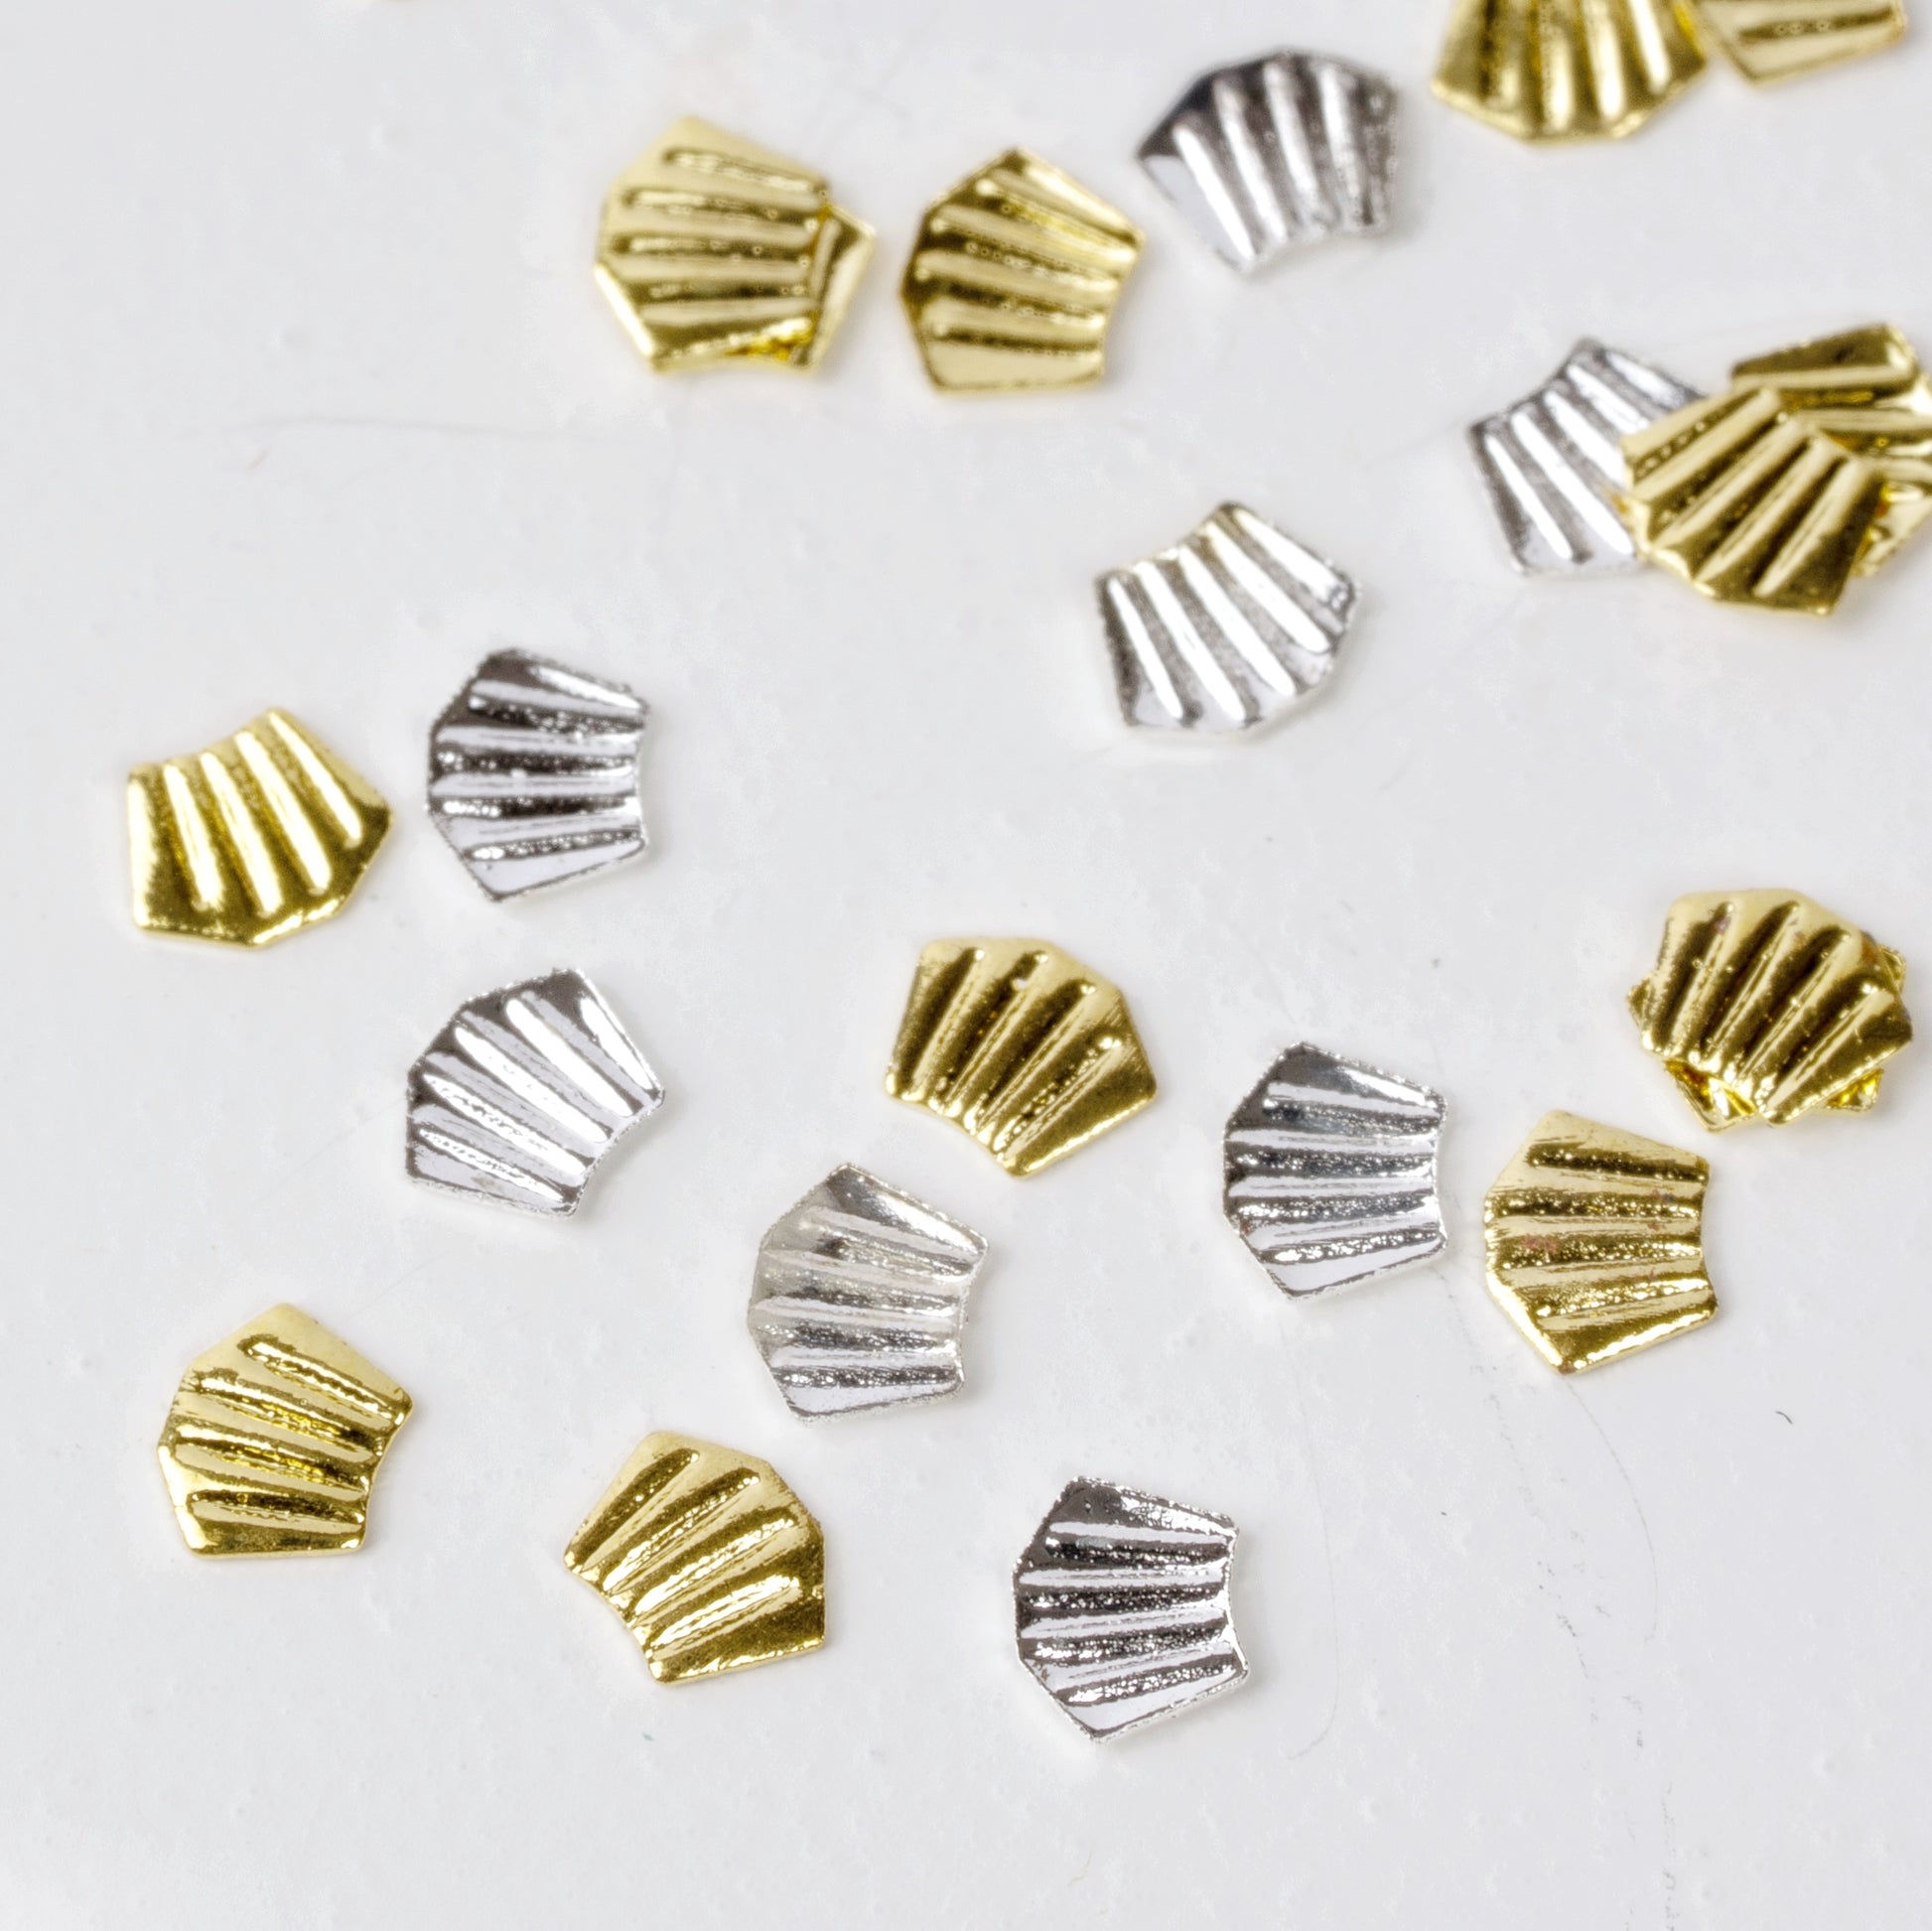 Nail charms scattered on white background.